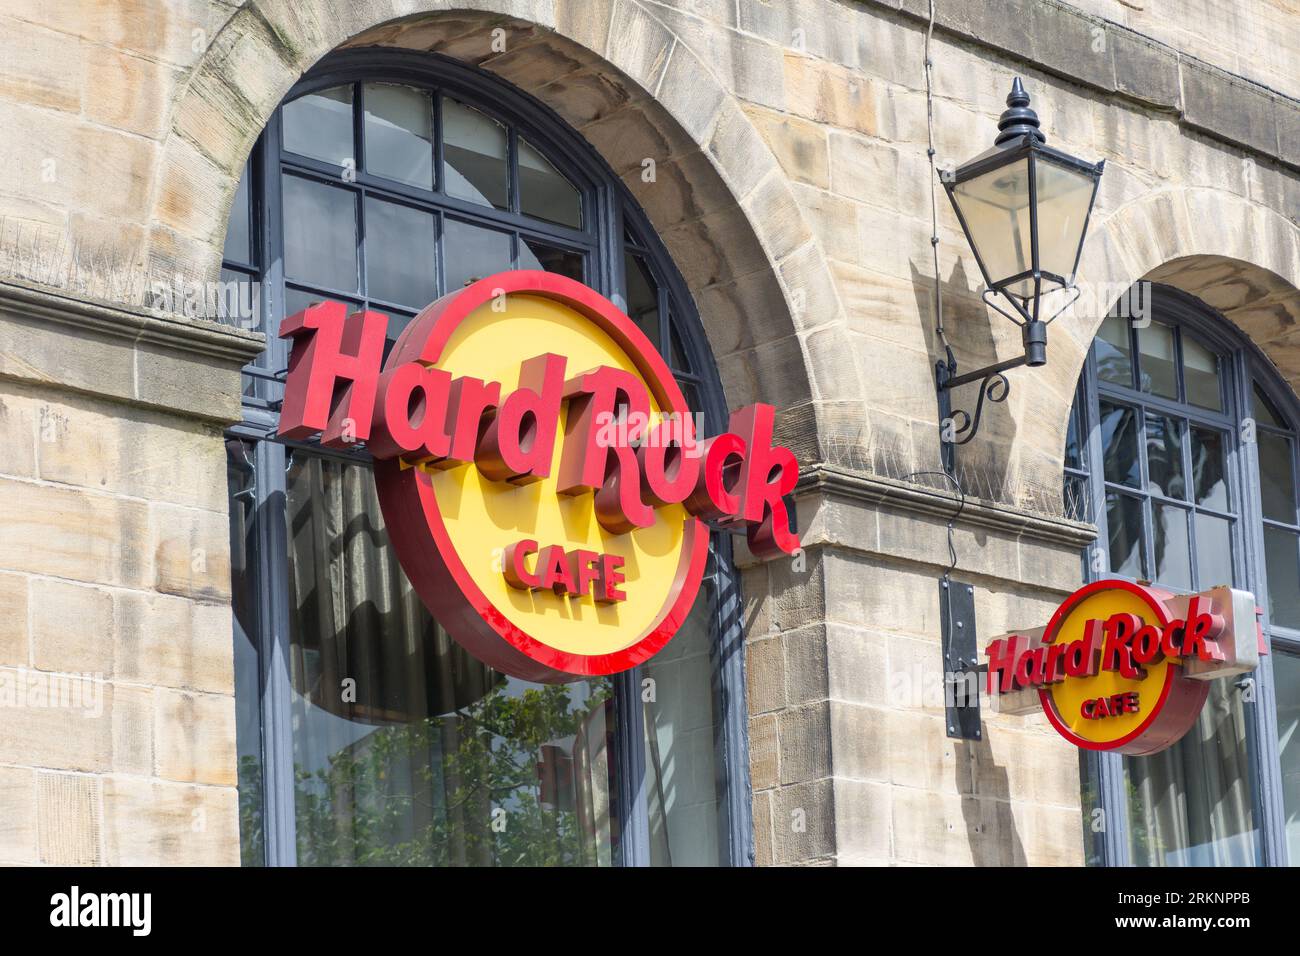 Hard Rock Cafe, Sandhill, Newcastle upon Tyne, Tyne and Wear, Inghilterra, Regno Unito Foto Stock